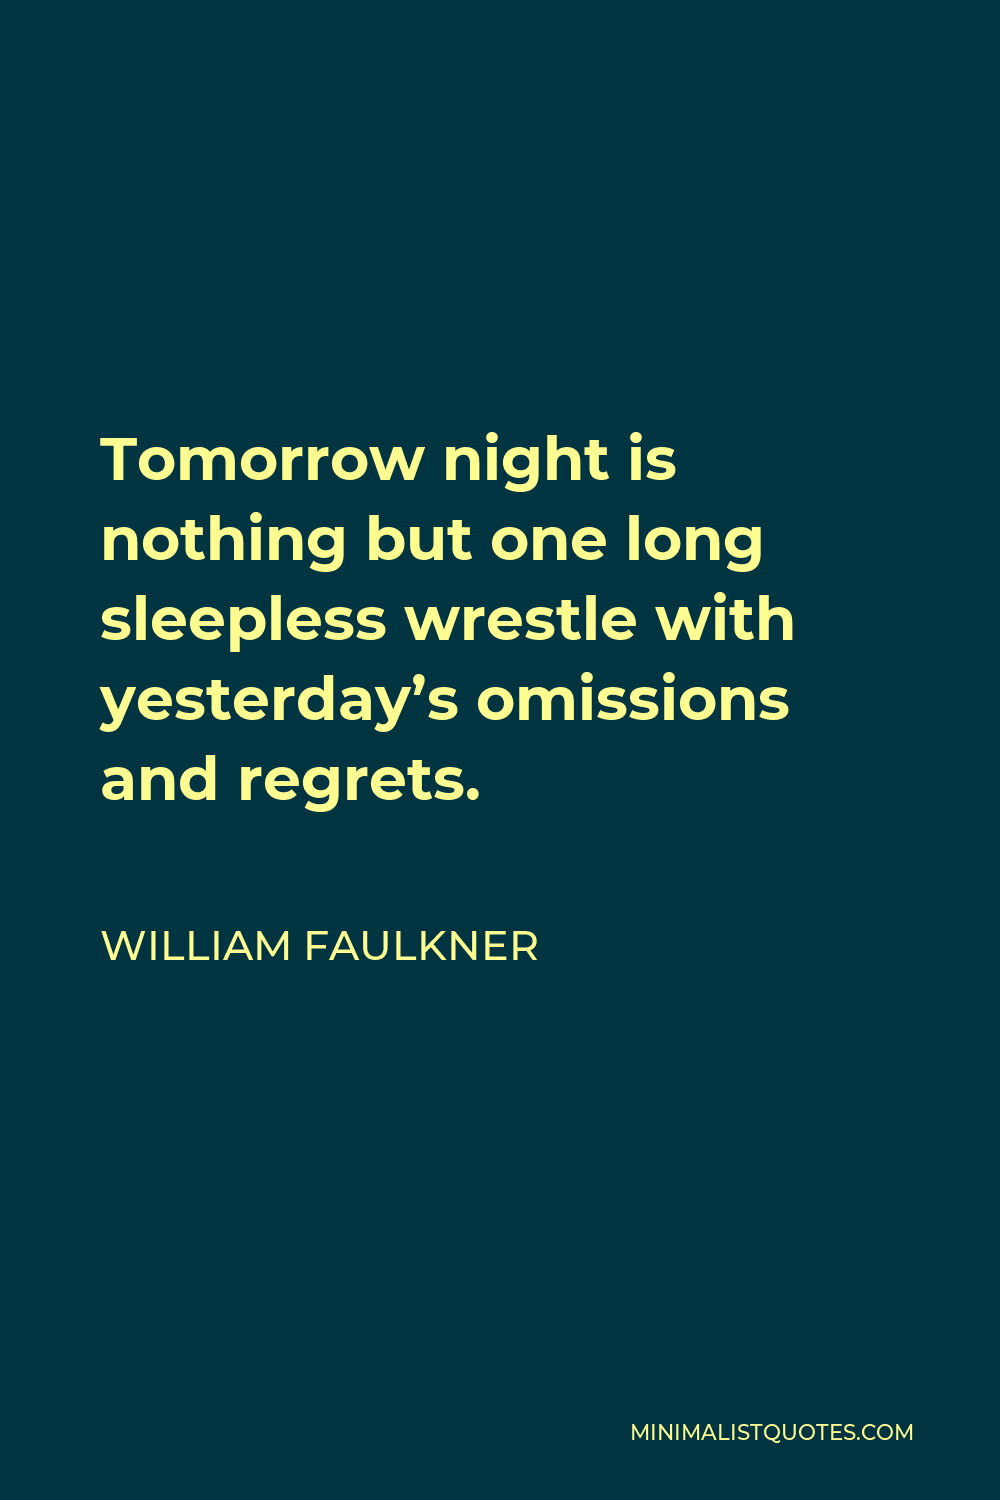 William Faulkner Quote - Tomorrow night is nothing but one long sleepless wrestle with yesterday’s omissions and regrets.